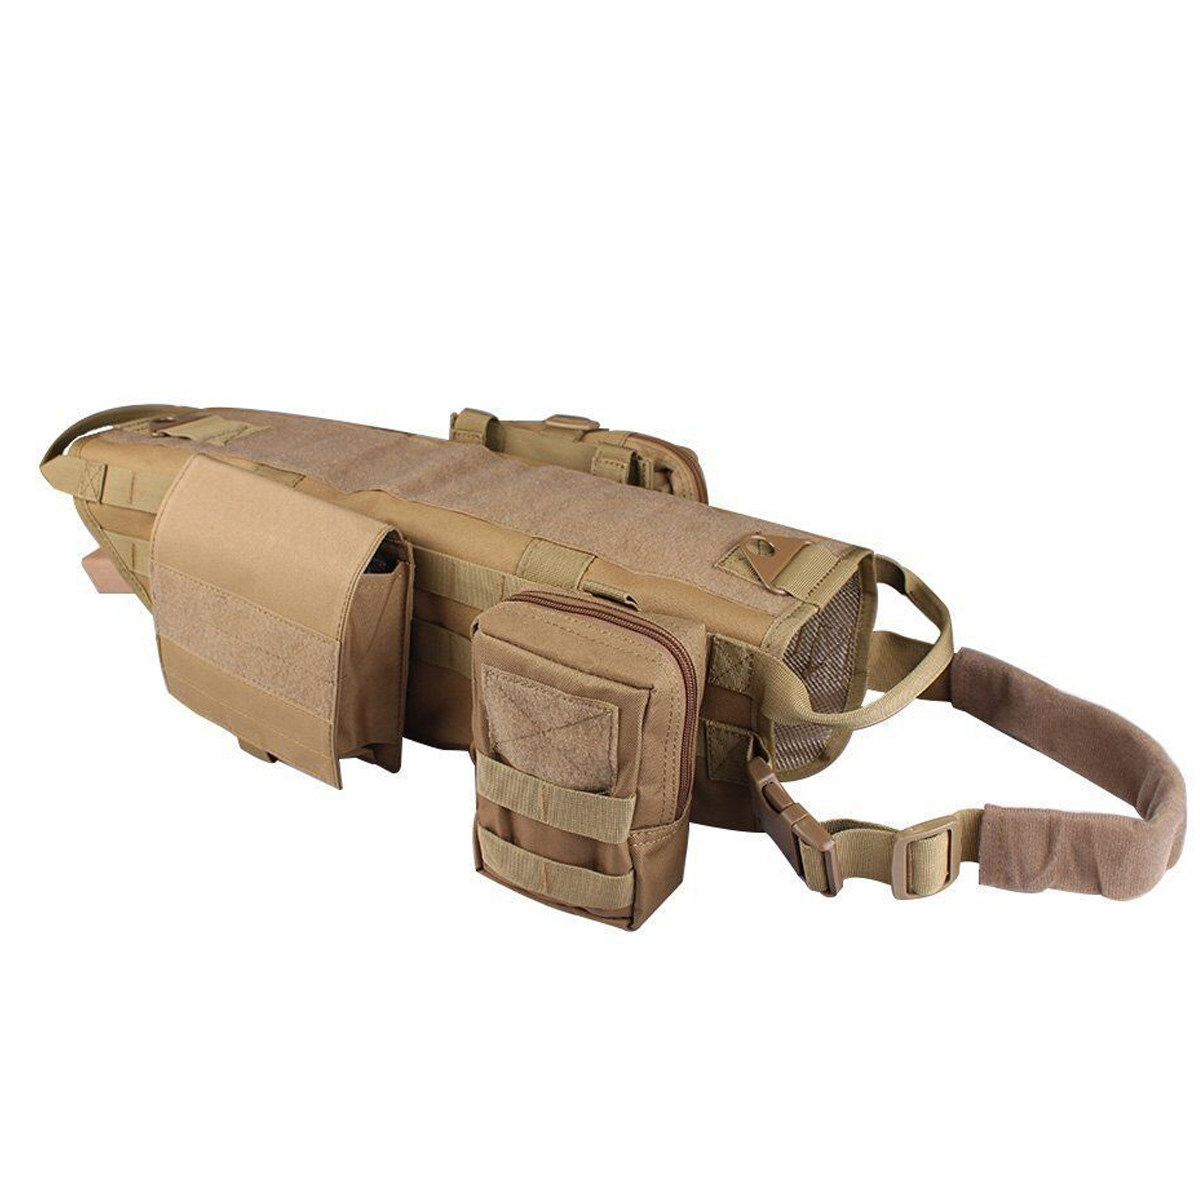 600D-Nylon-Tactical-Dog-Vests-Military-Dog-Clothes-with-Storage-Bag-Training-Load-Bearing-Harness-1817367-6